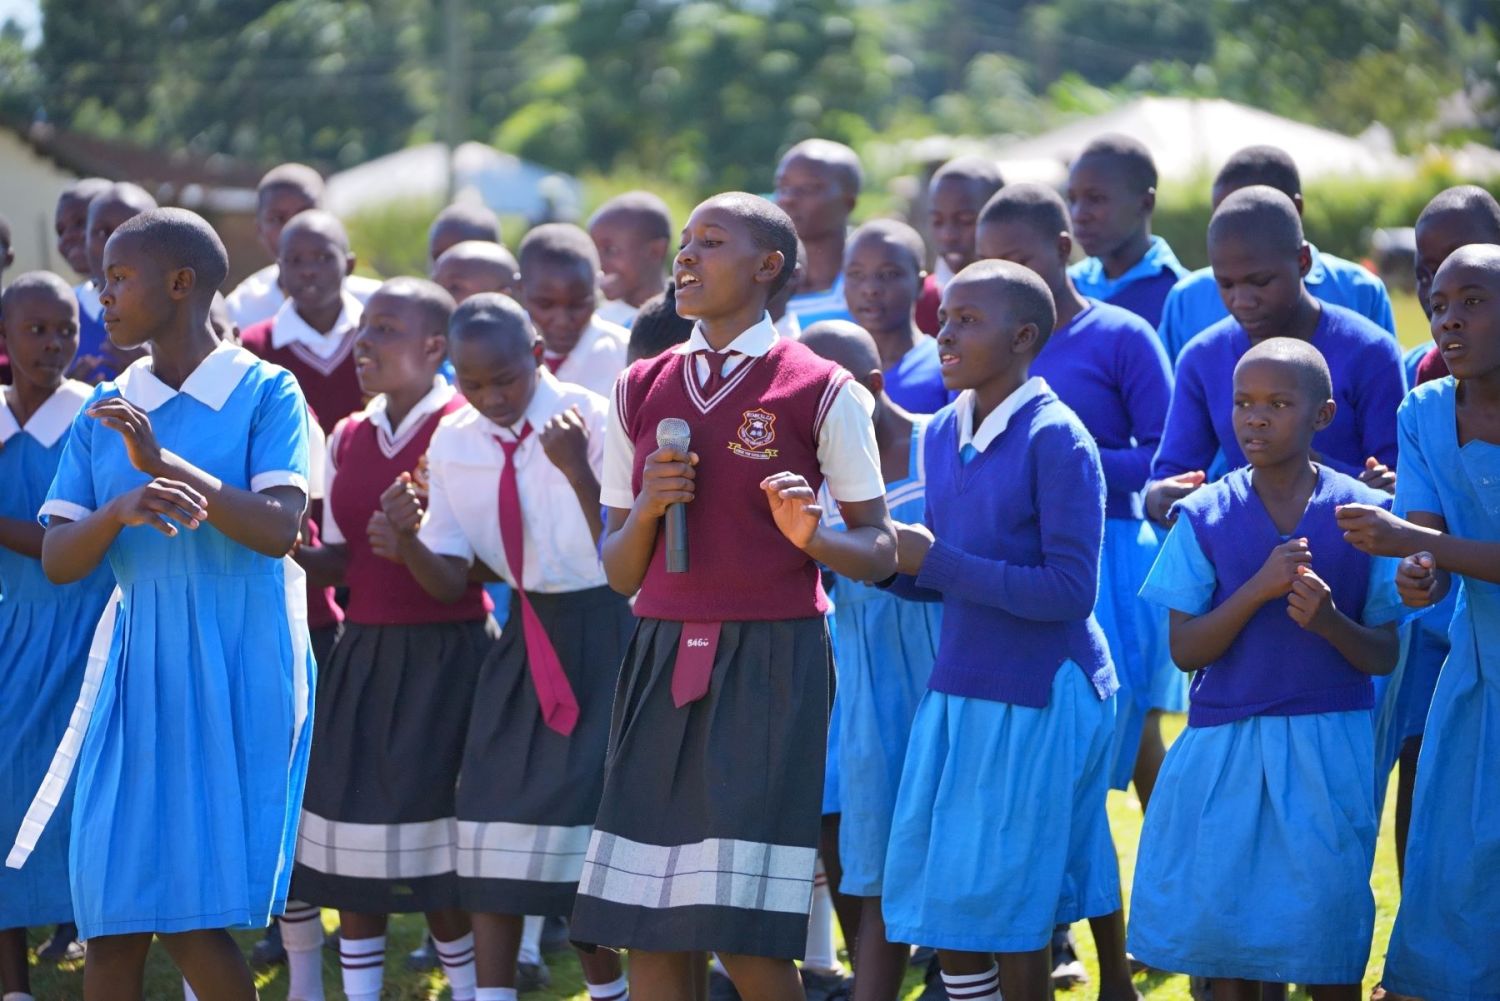 Adolescent girls gather for an event at a school in Kenya